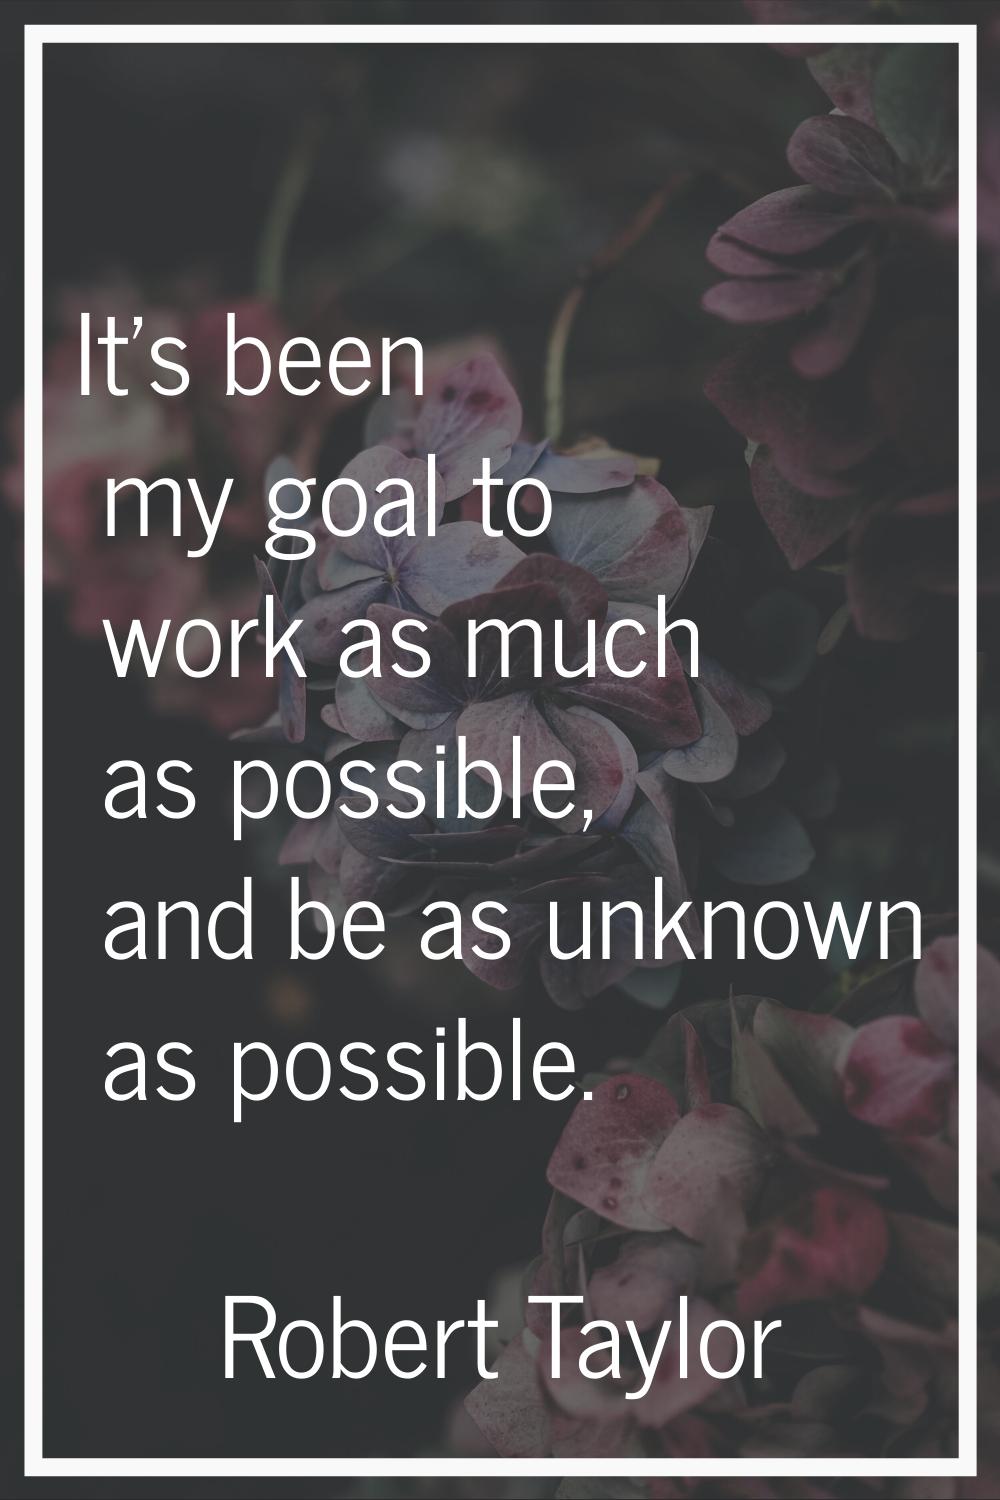 It's been my goal to work as much as possible, and be as unknown as possible.